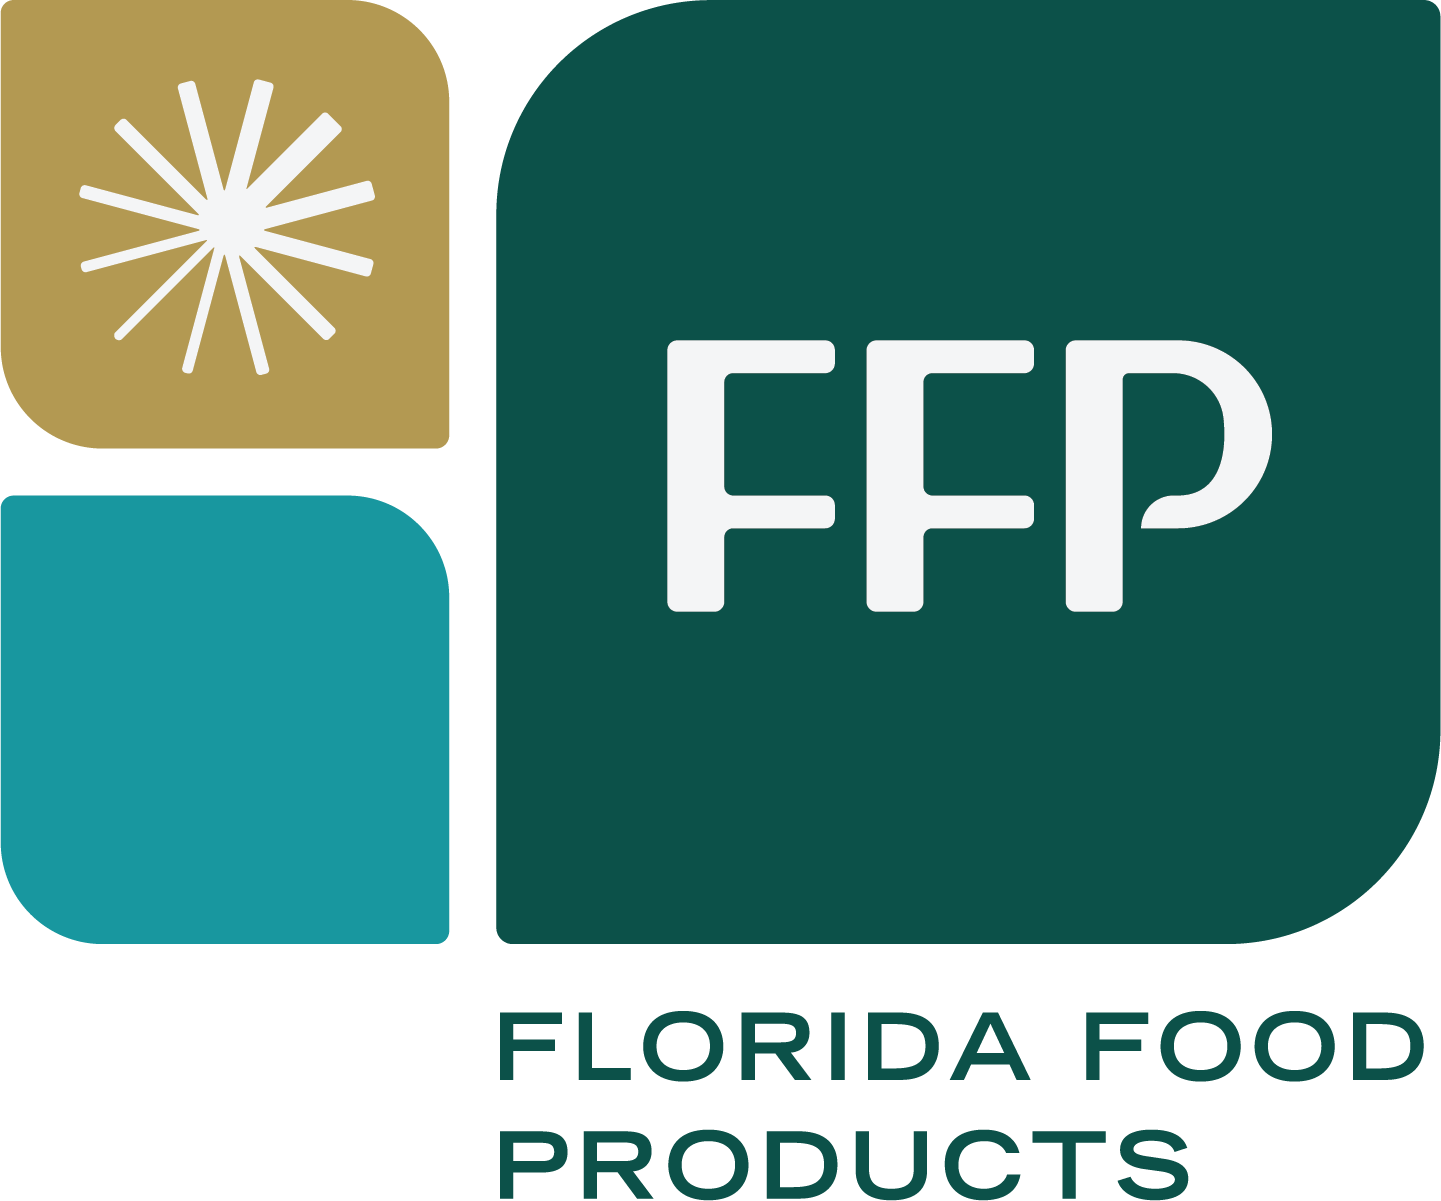 Florida Food Products Acquires Comax Flavors